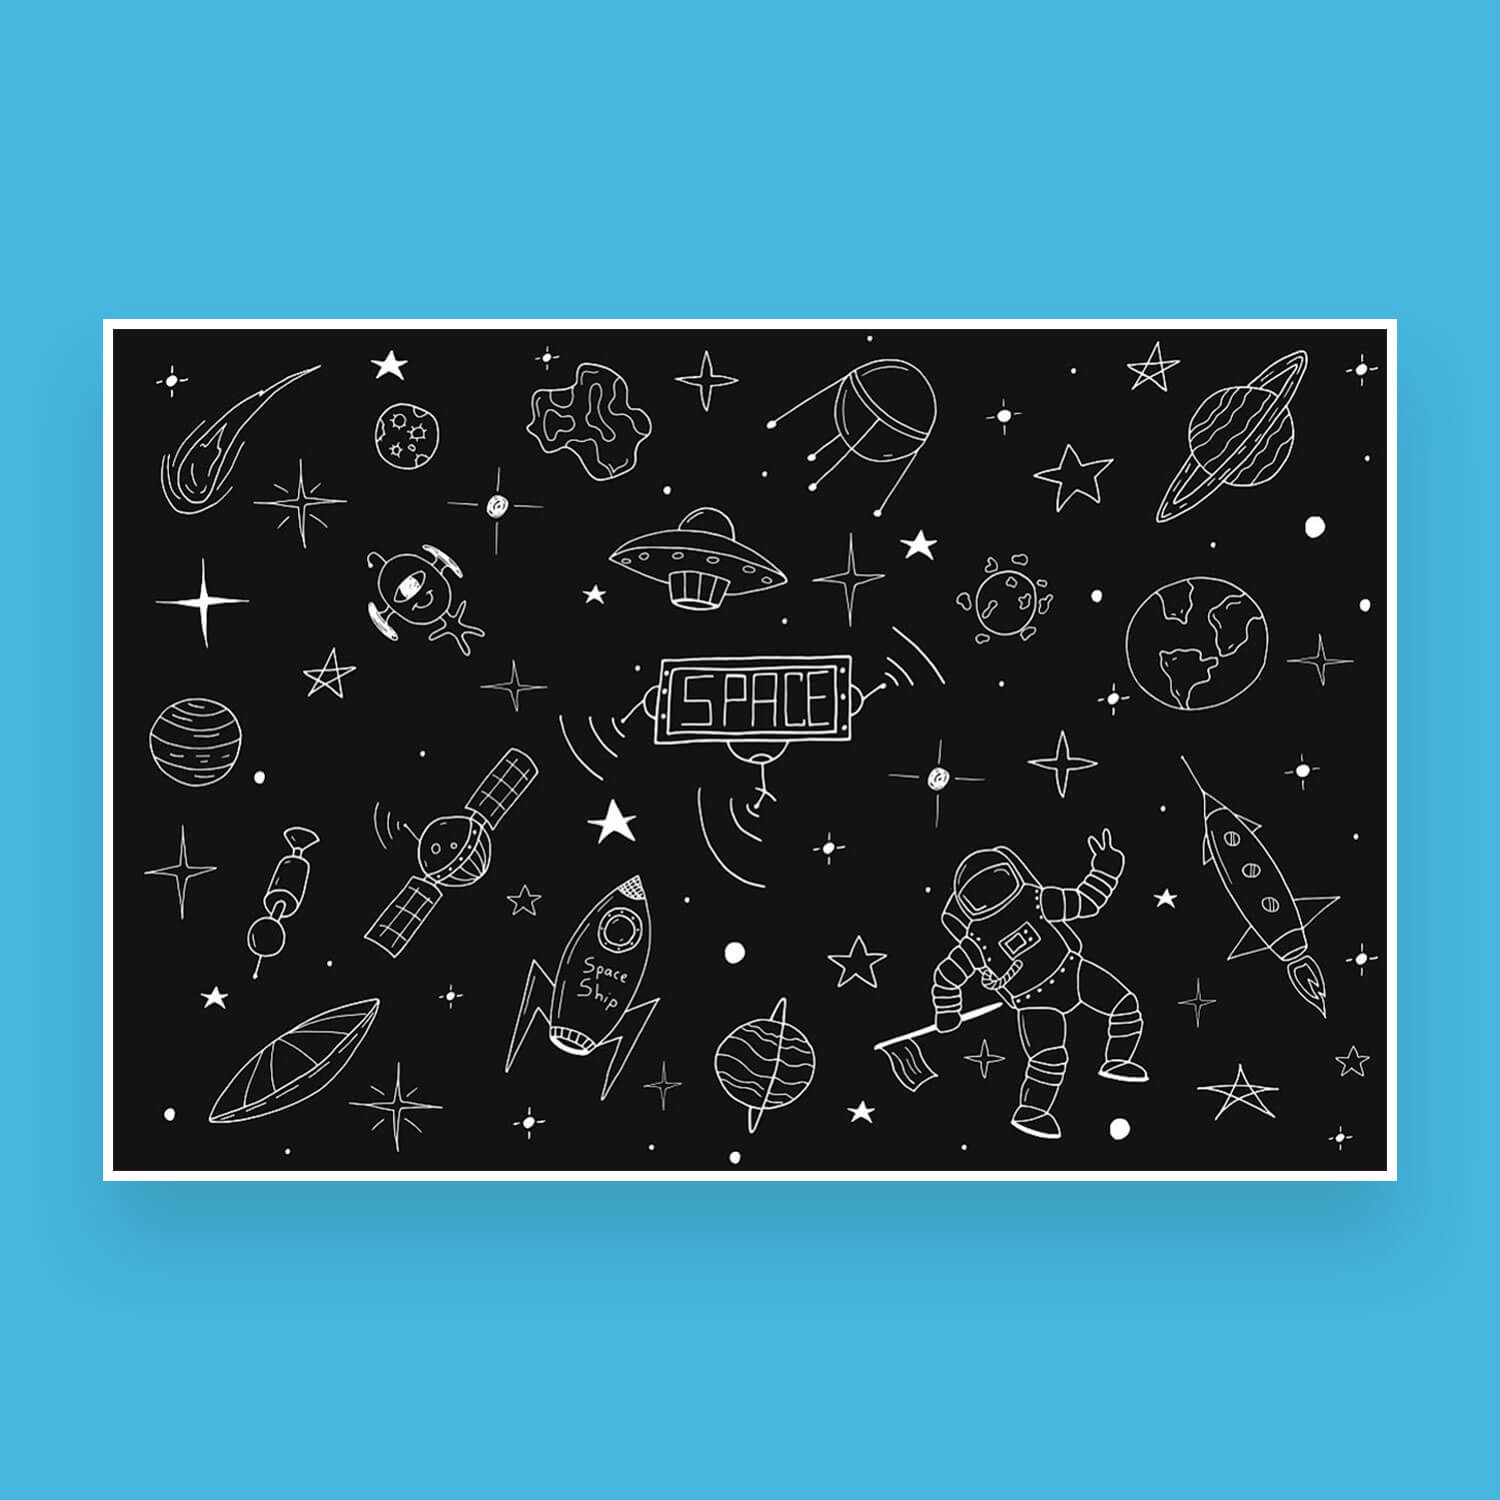 Space theme drawing in doodle style on a black background with a turquoise border.